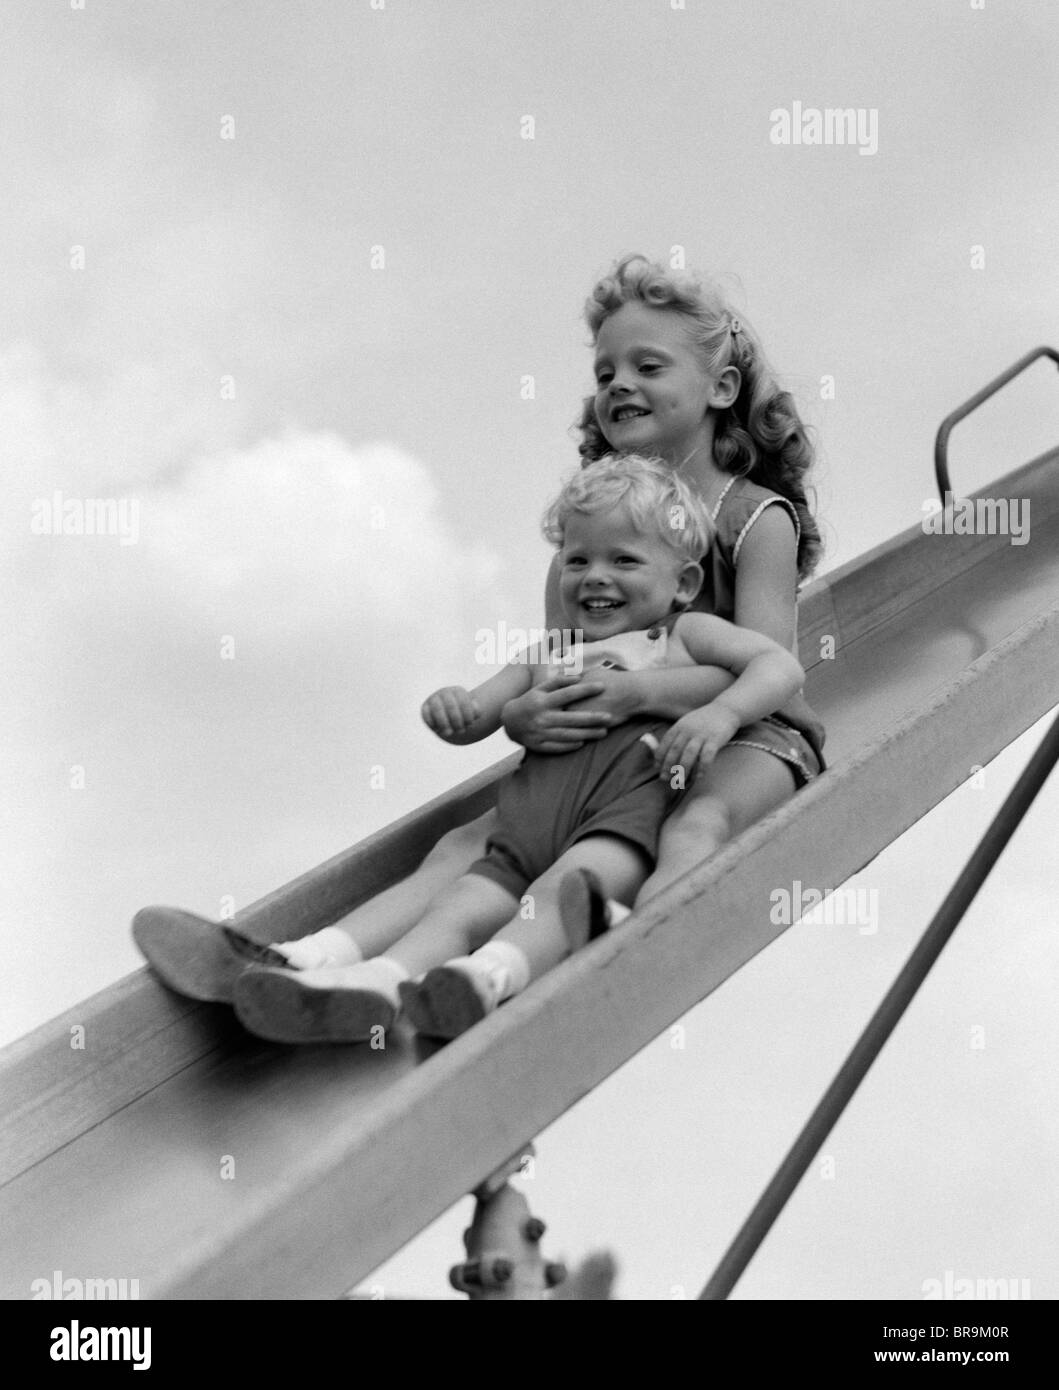 1950s 1960s TWO SMILING CHILDREN GOING DOWN PLAYGROUND SLIDE Stock Photo